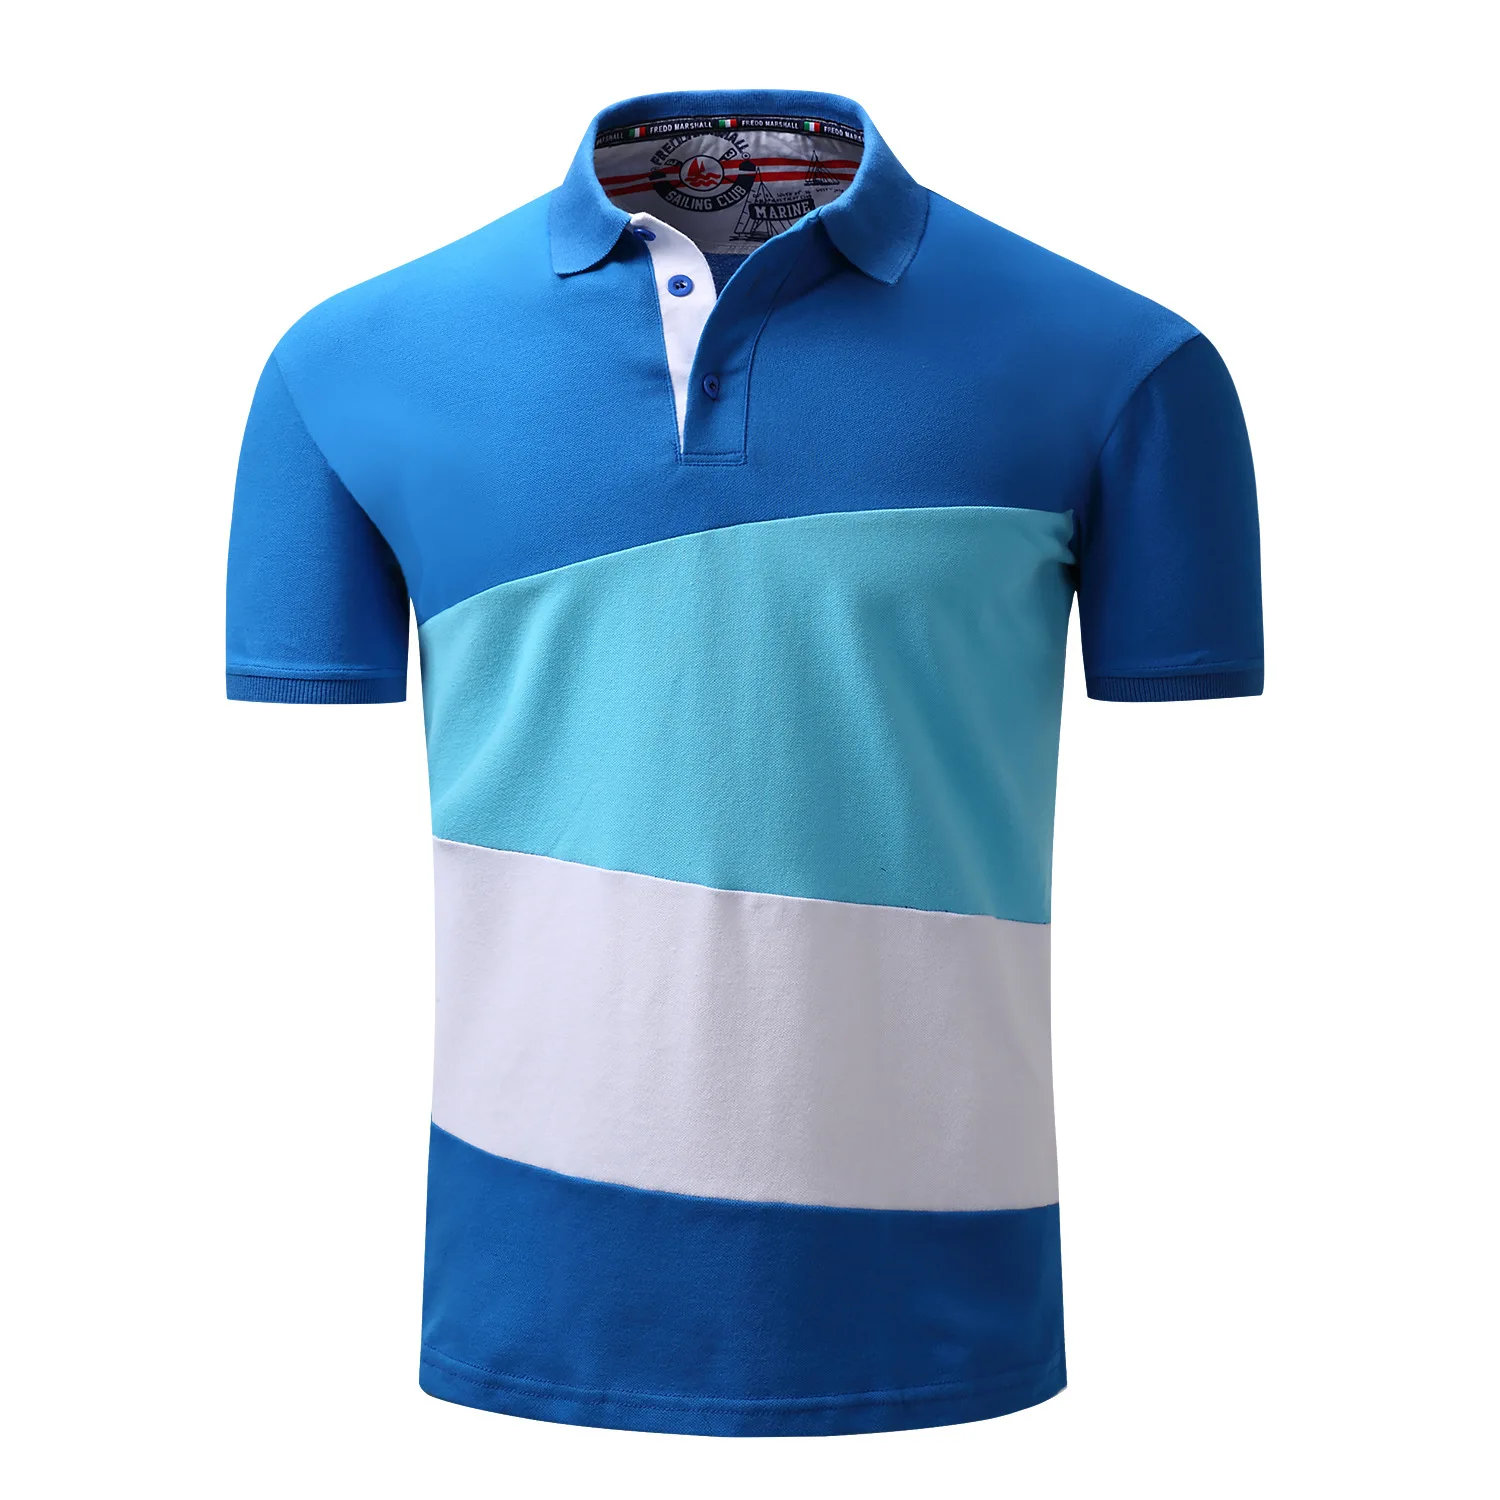 Time series Offense Persuasion P53 2018 Stitching Blue Solid Dry Fit Polo Camisas De Polo De Microfibra -  Buy Volkswagen Polo Bumper,Polo France,Fred Perry Polo Product on  Alibaba.com